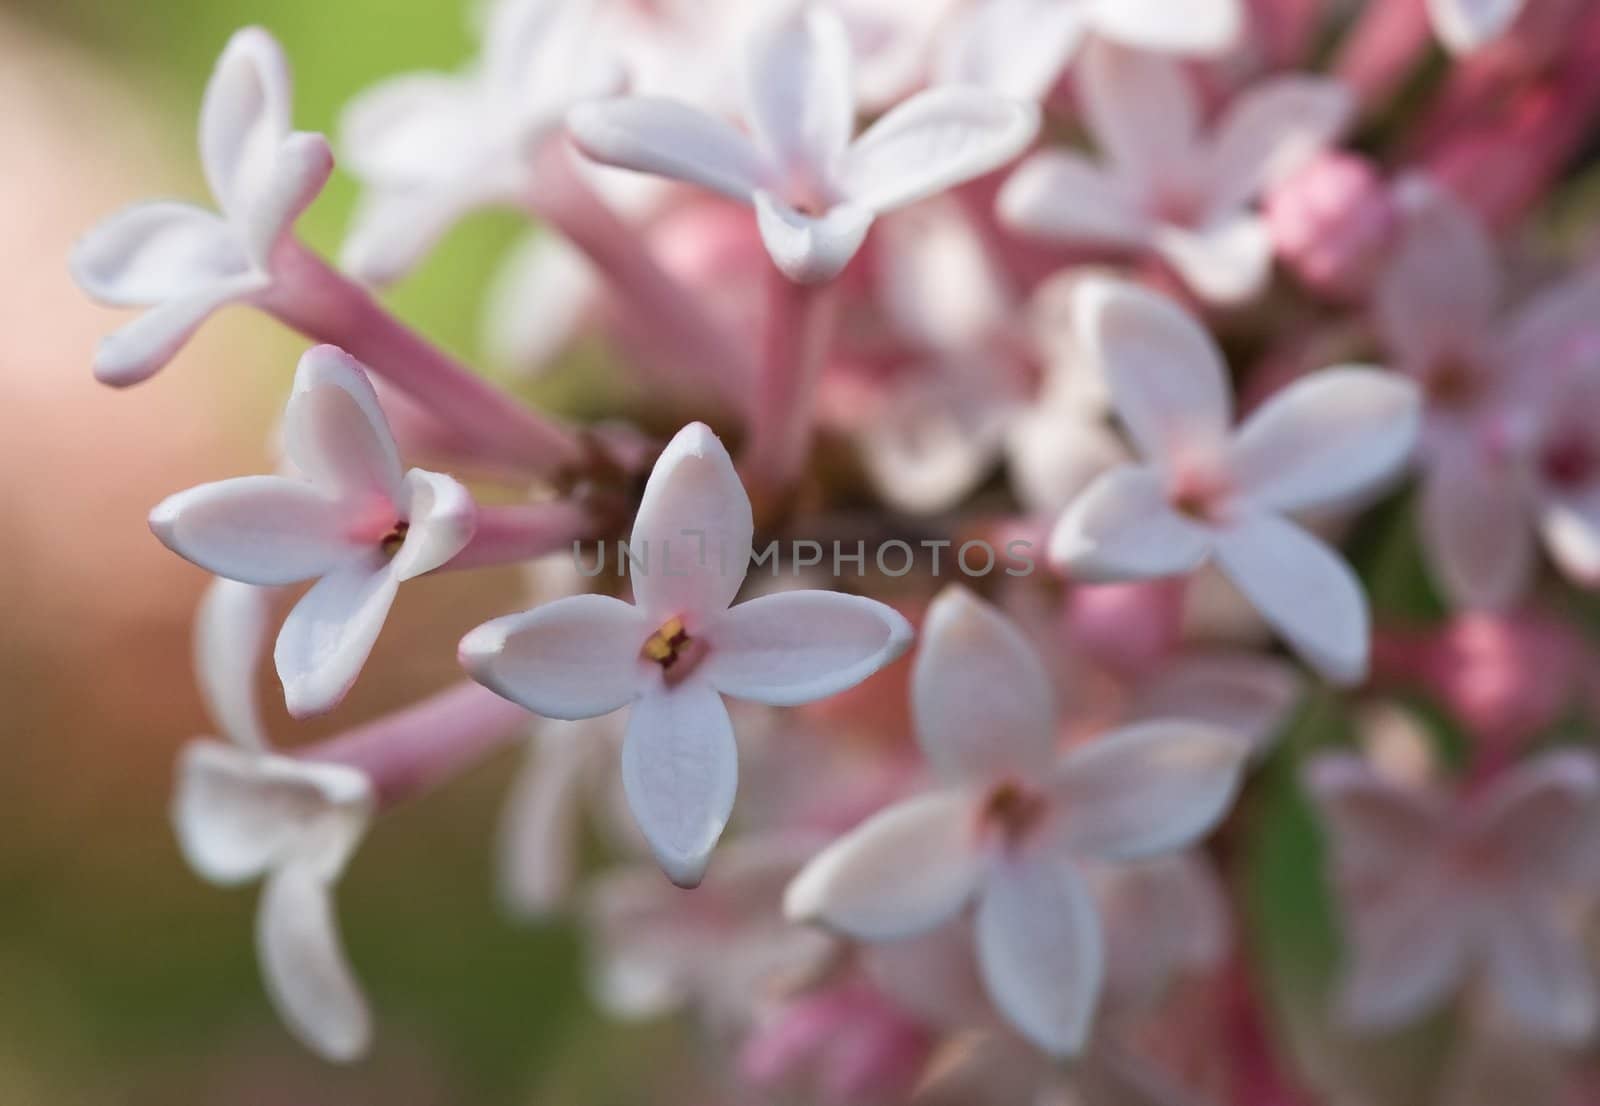 Syringa in close view by Colette